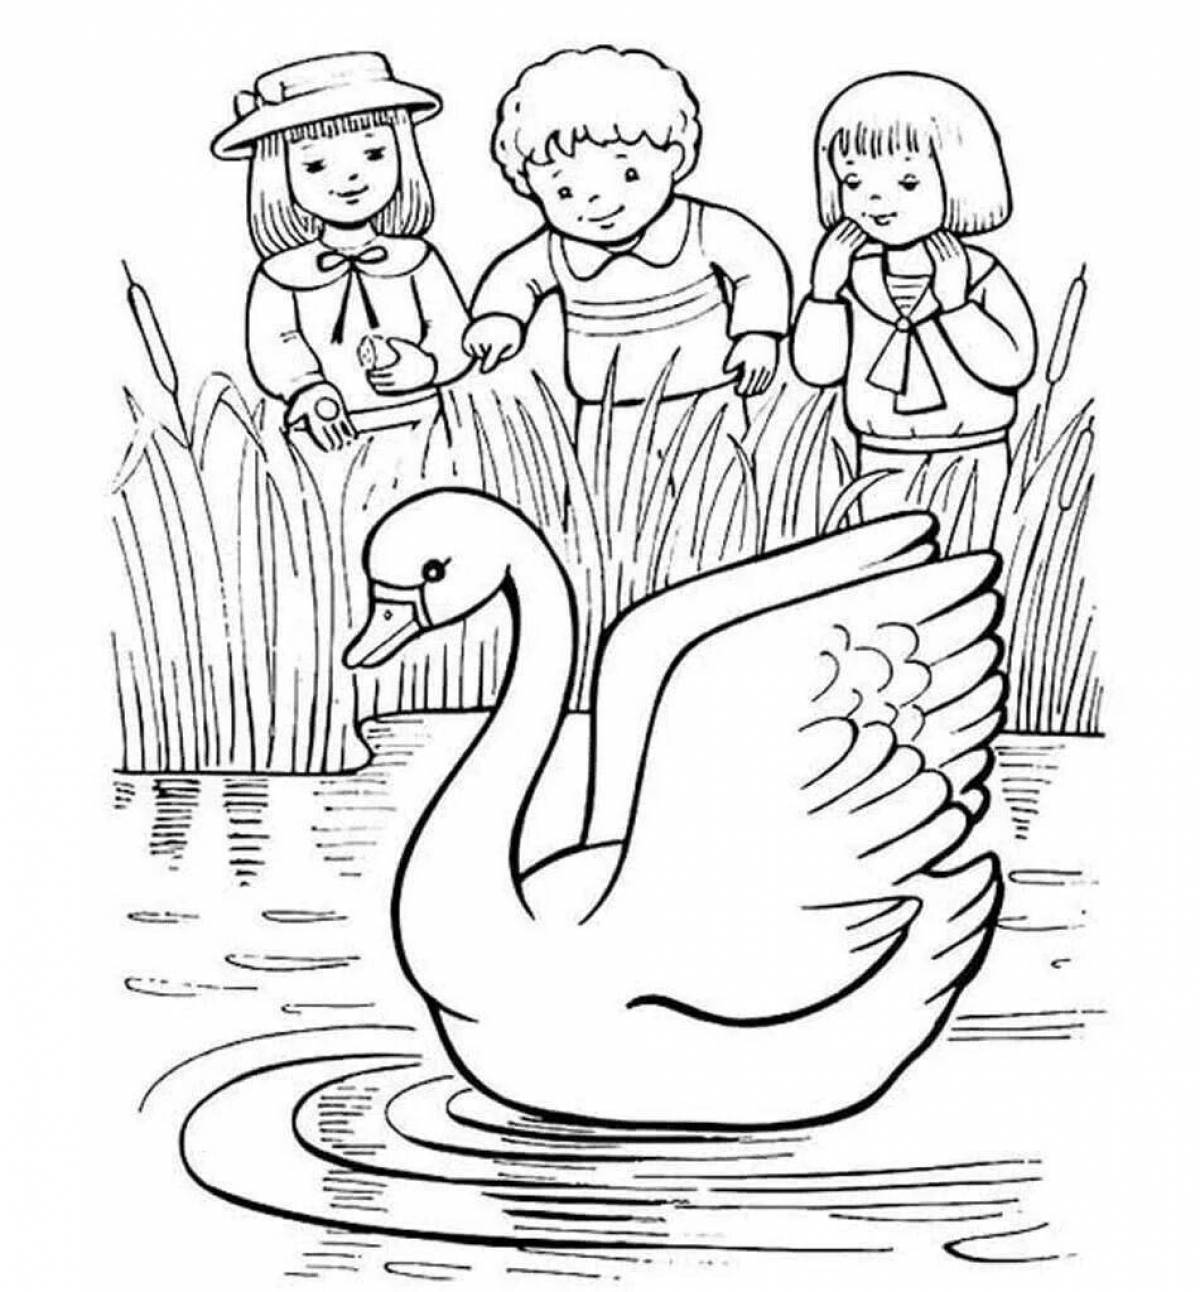 Ugly duckling coloring book for kids